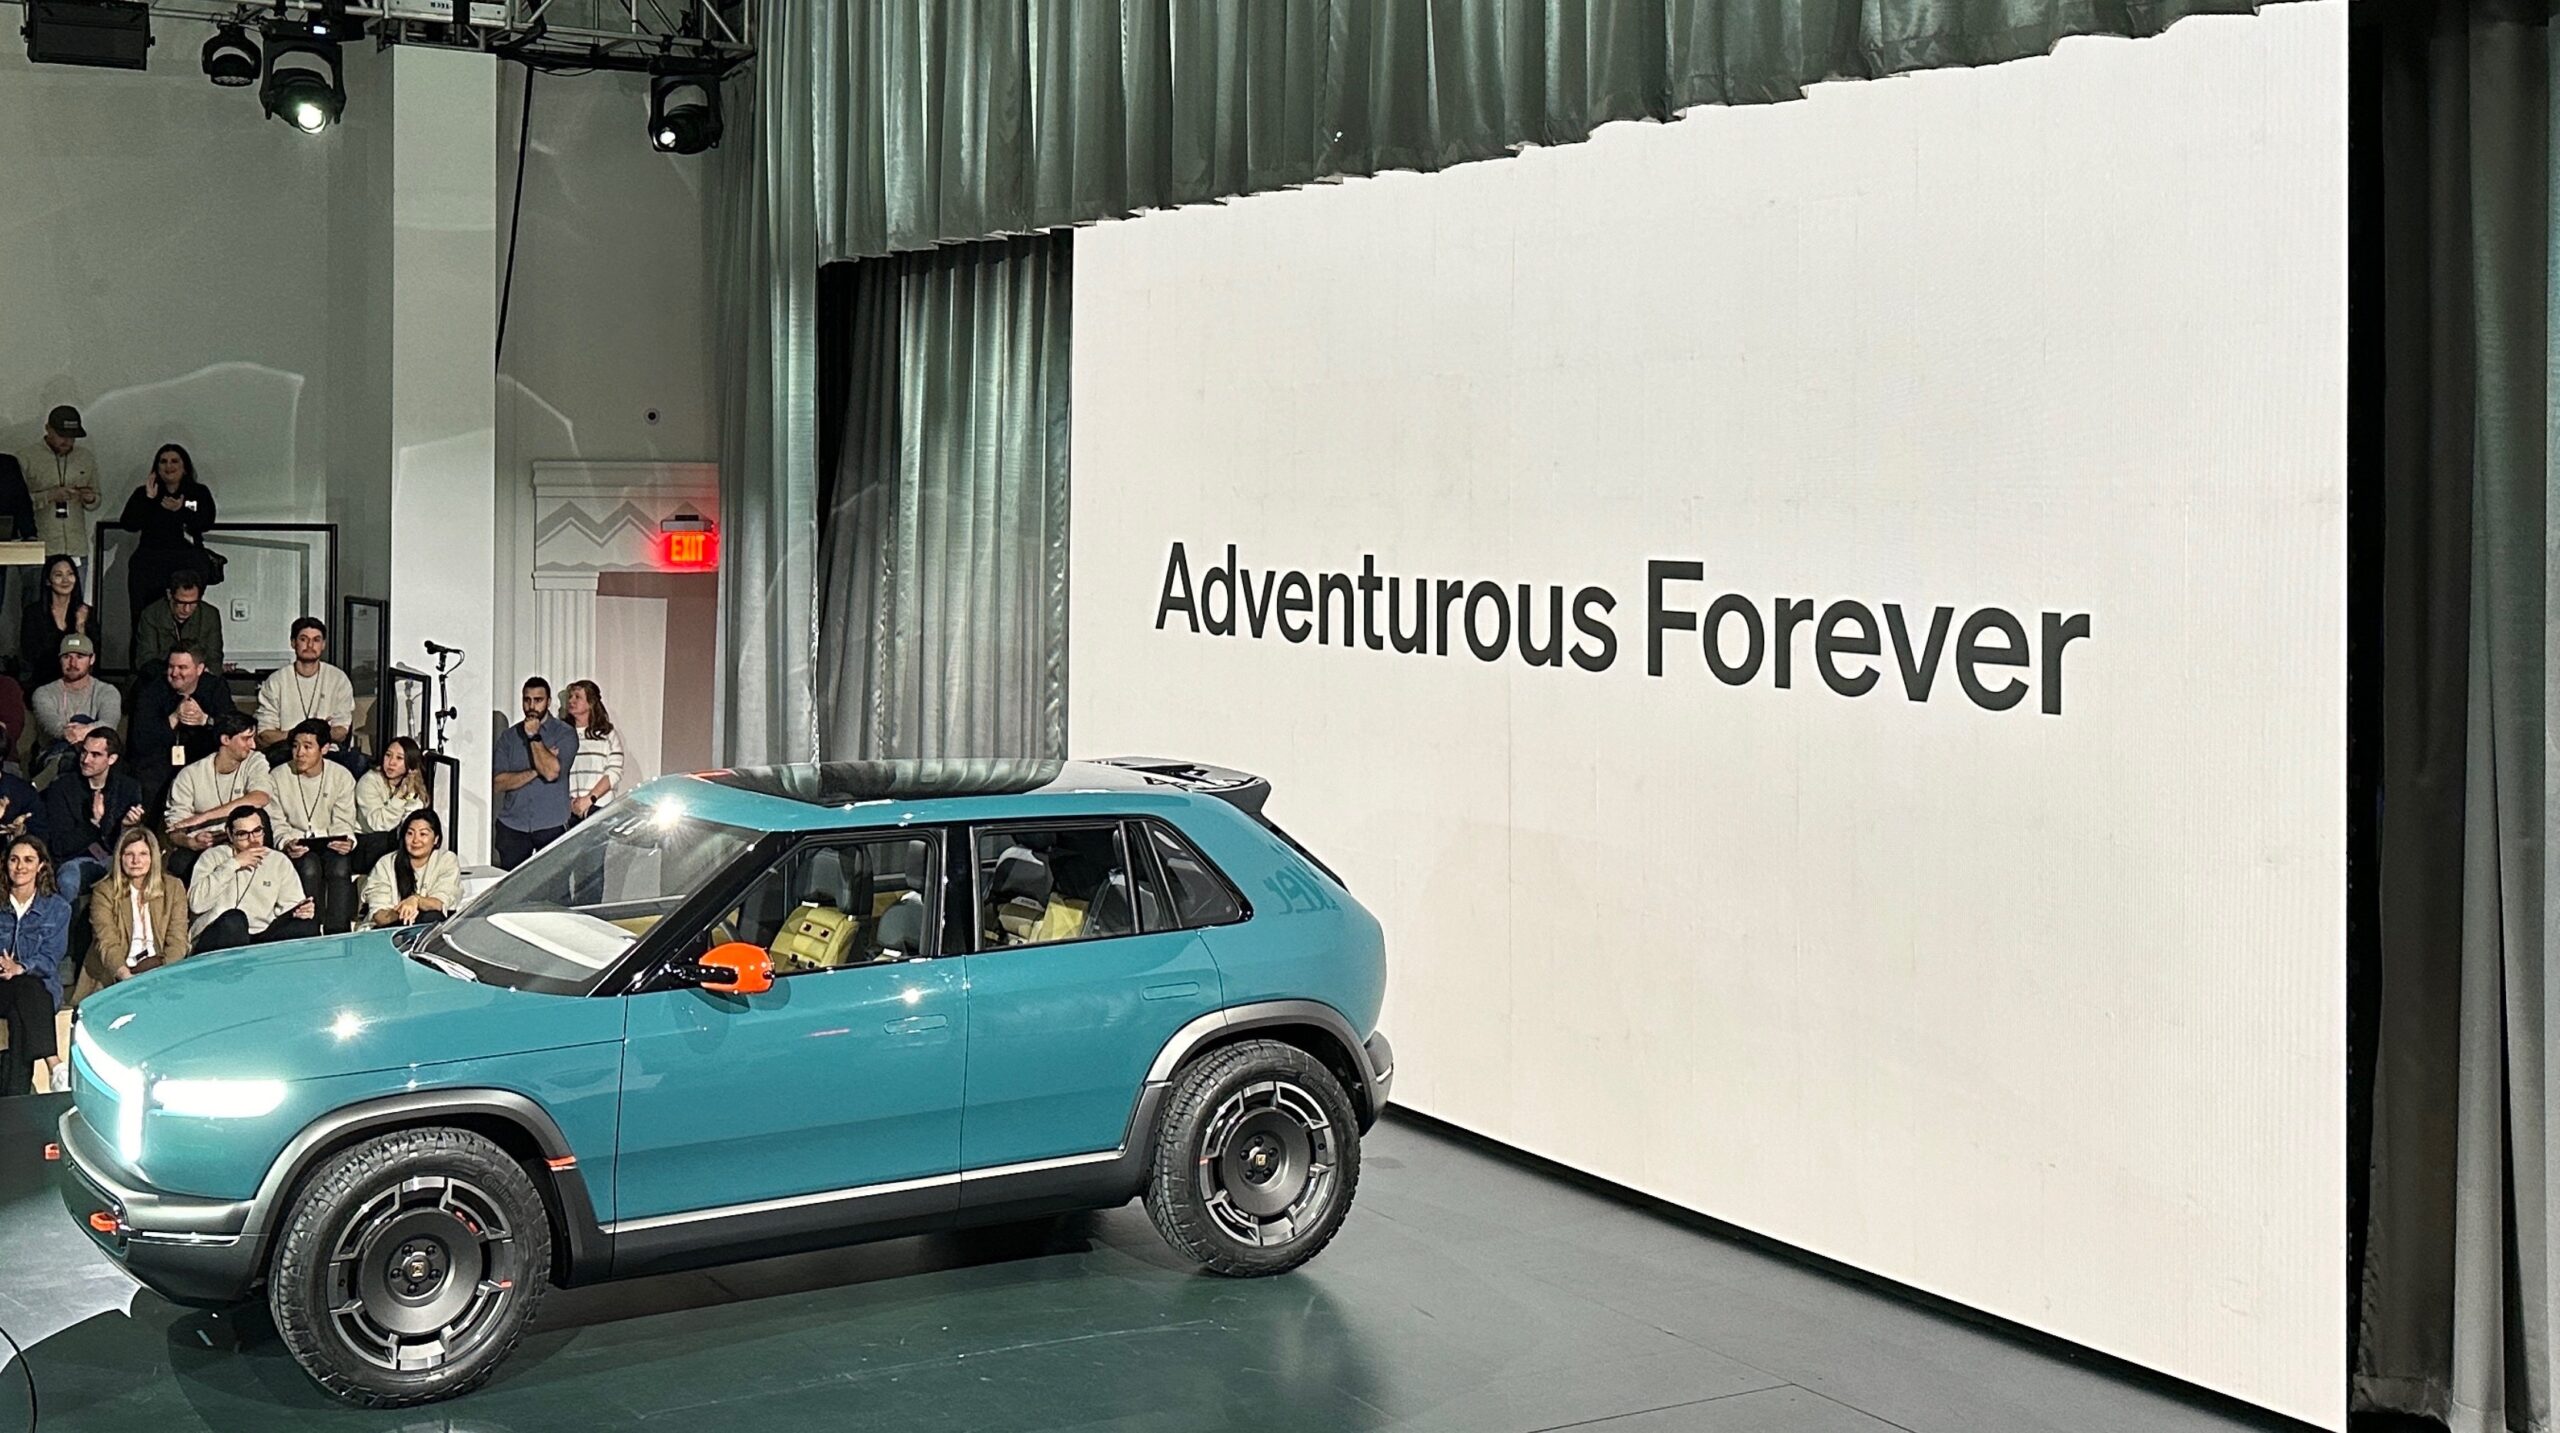 a green-blue hatchback car on a stage in front of the words "Adventurous Forever"